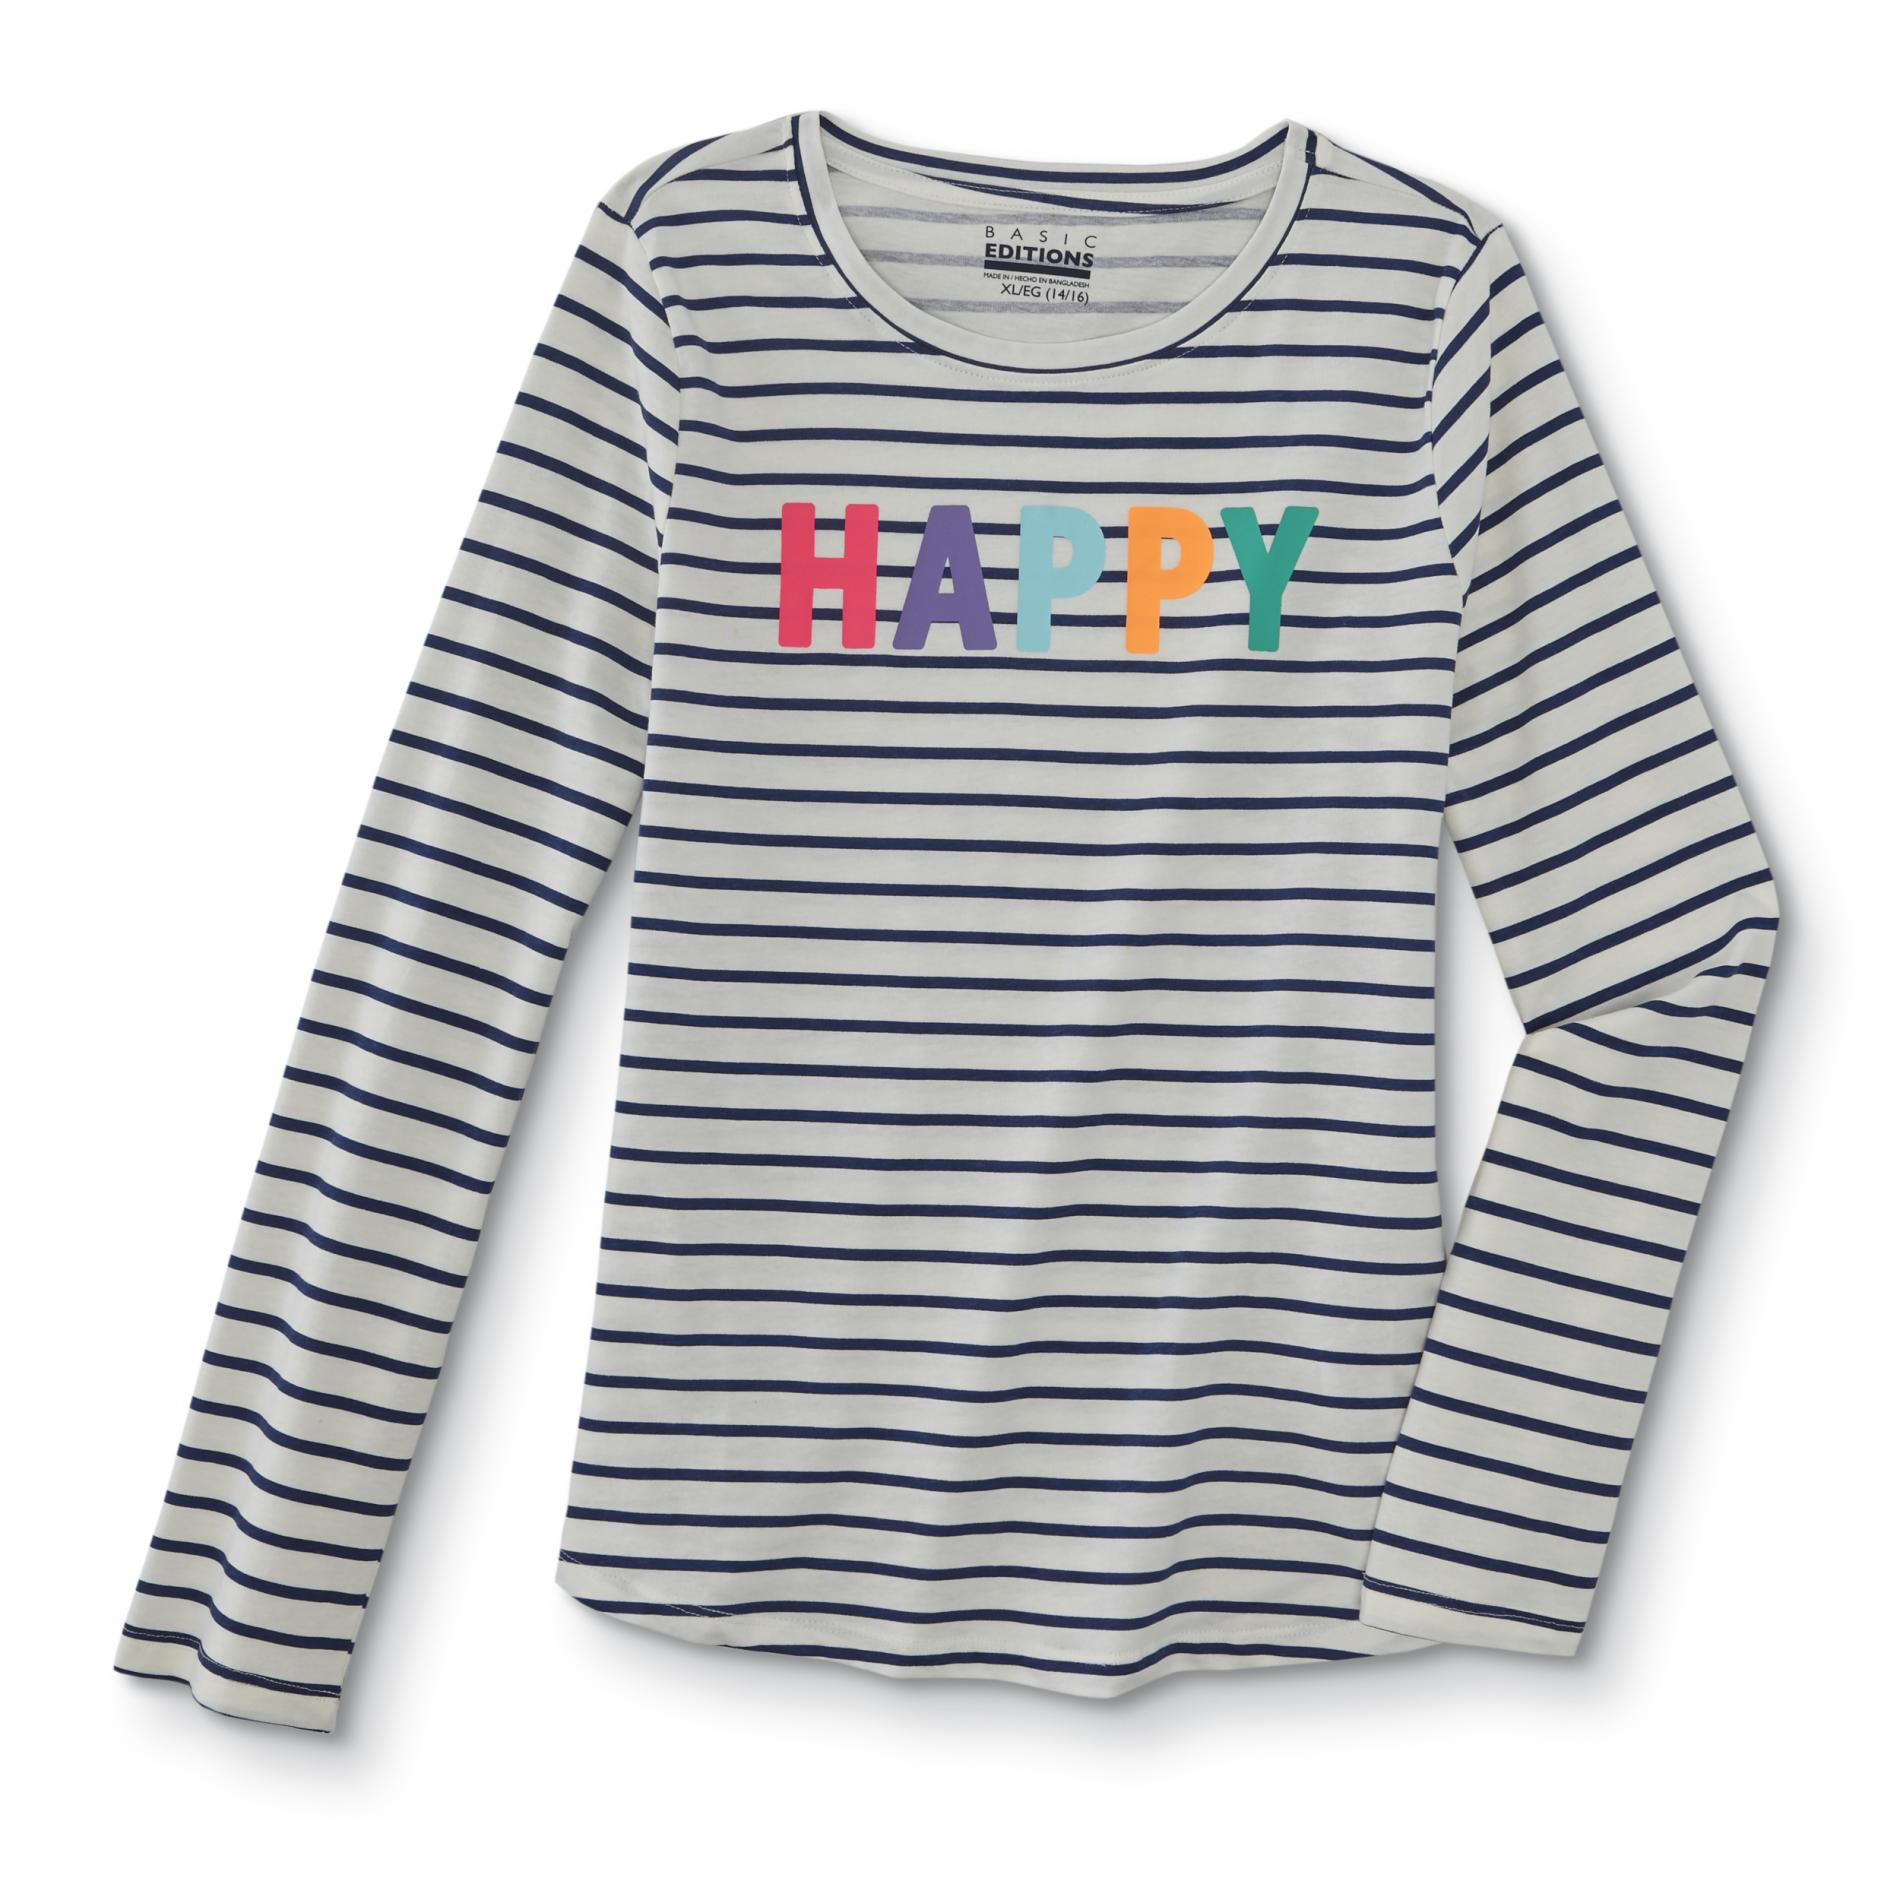 Basic Editions Girls' Graphic Shirt - Striped & Happy